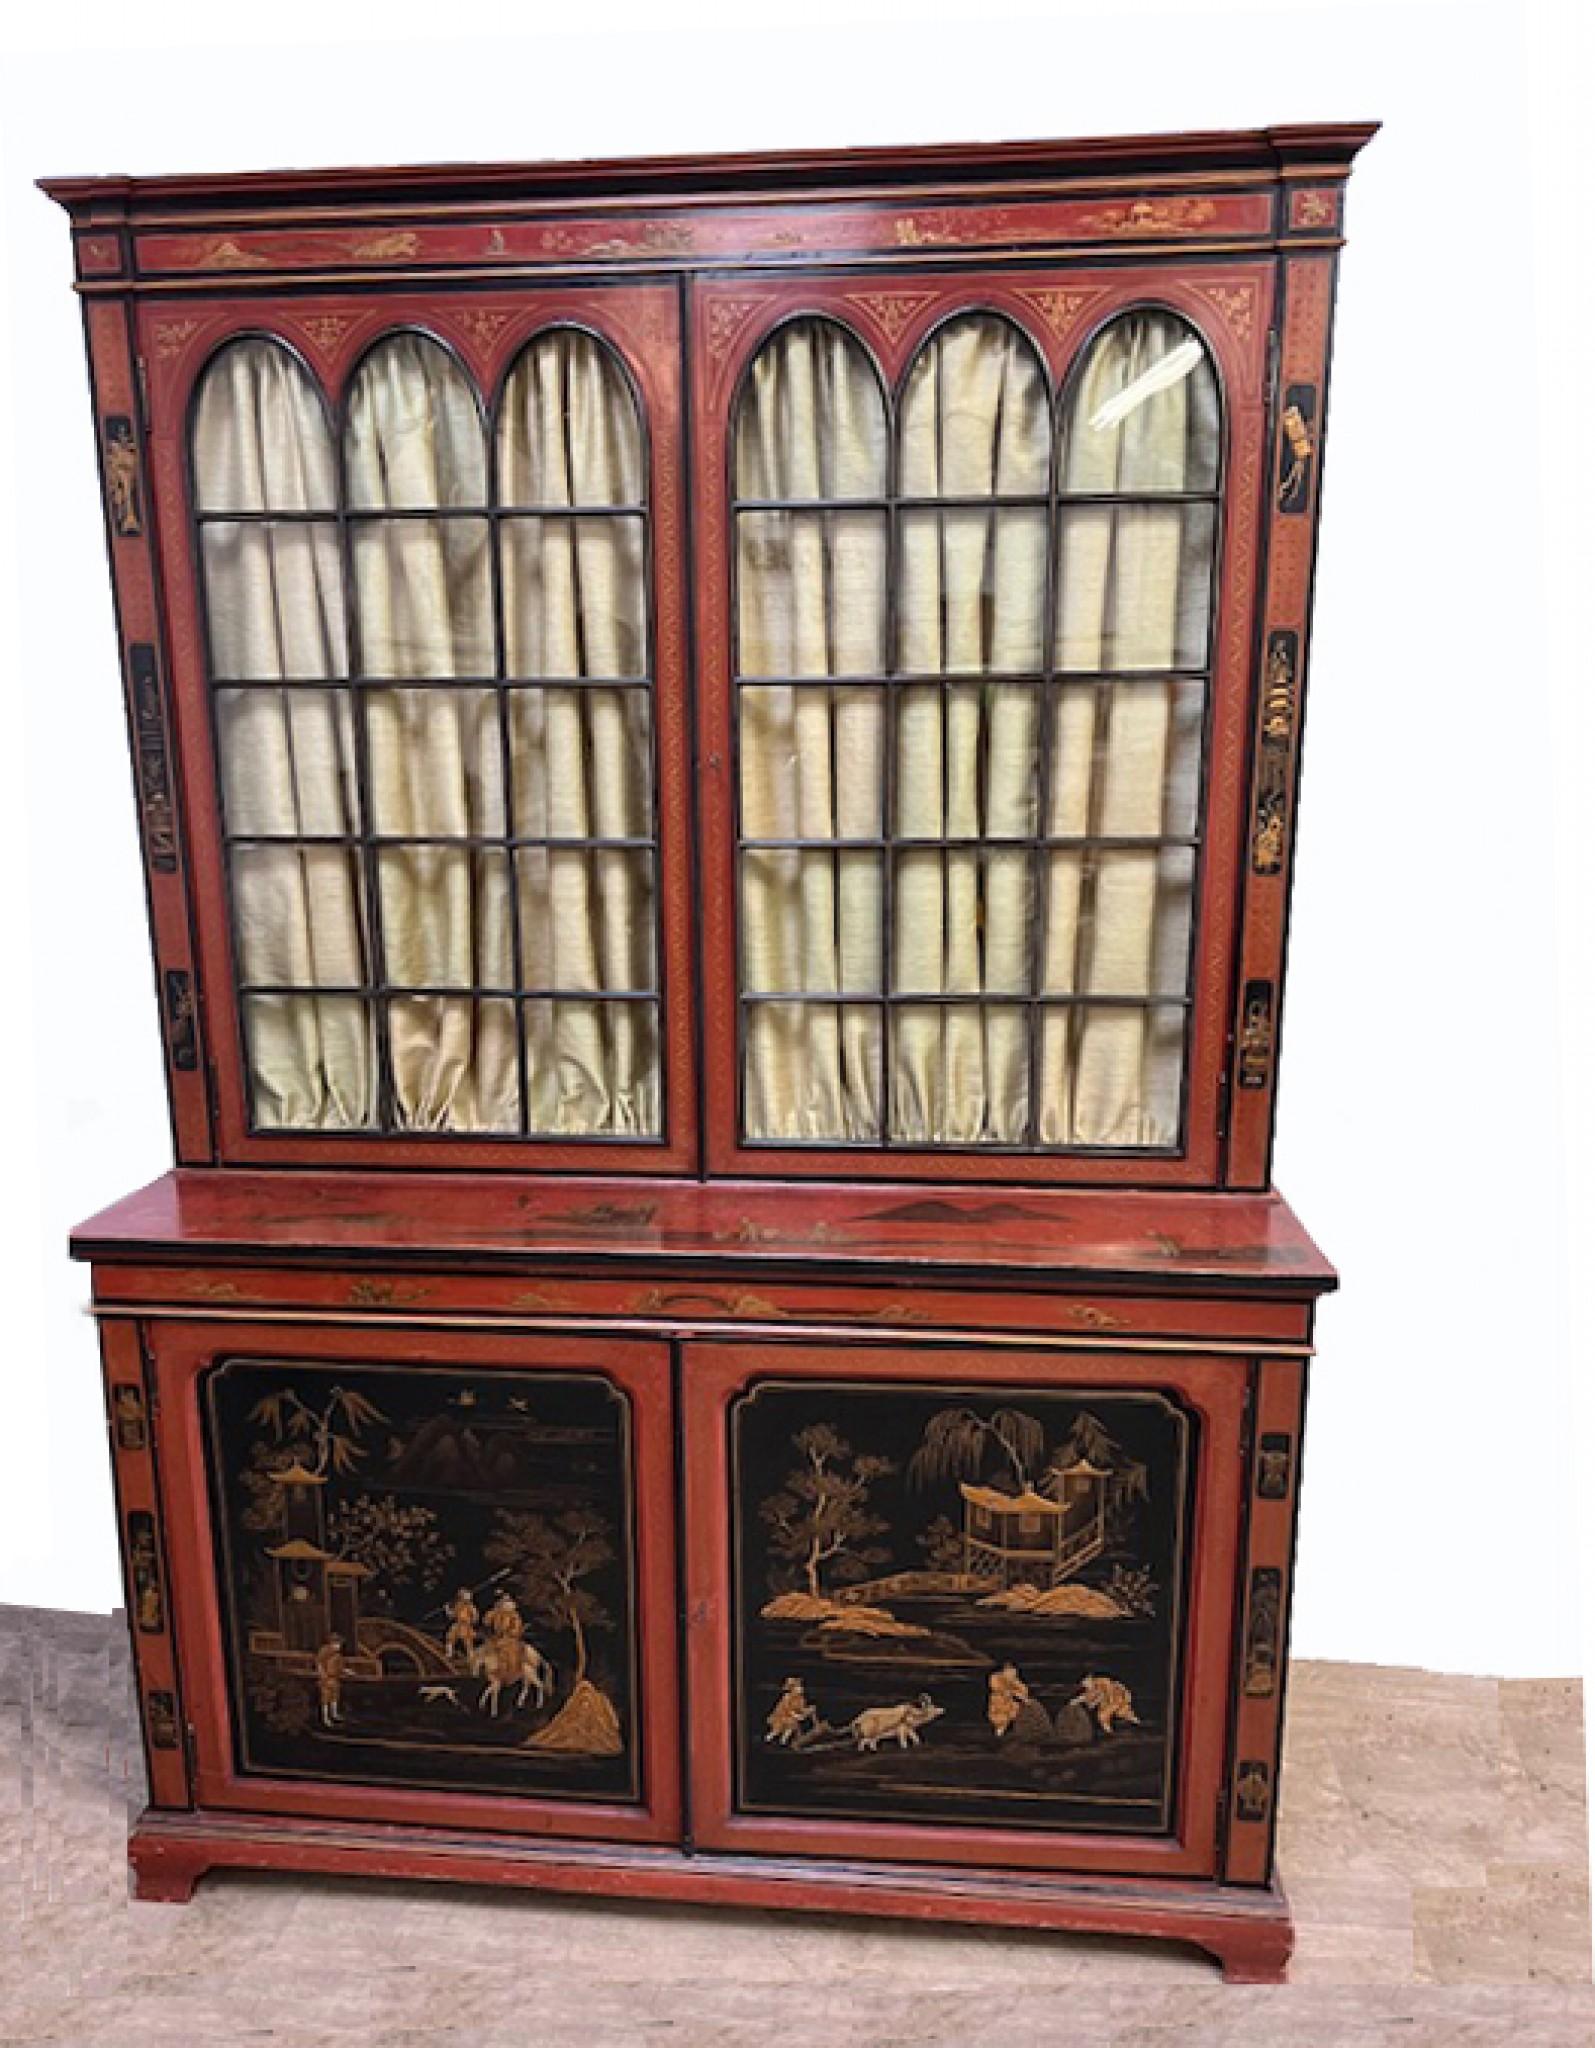 You are viewing a gorgeous antique English library bookcase in eye catching red lacquer
Such a great look to this important piece which we date to 1880
The cabinet features intricate Chinoiserie on all surfaces but it's particularly eye catching